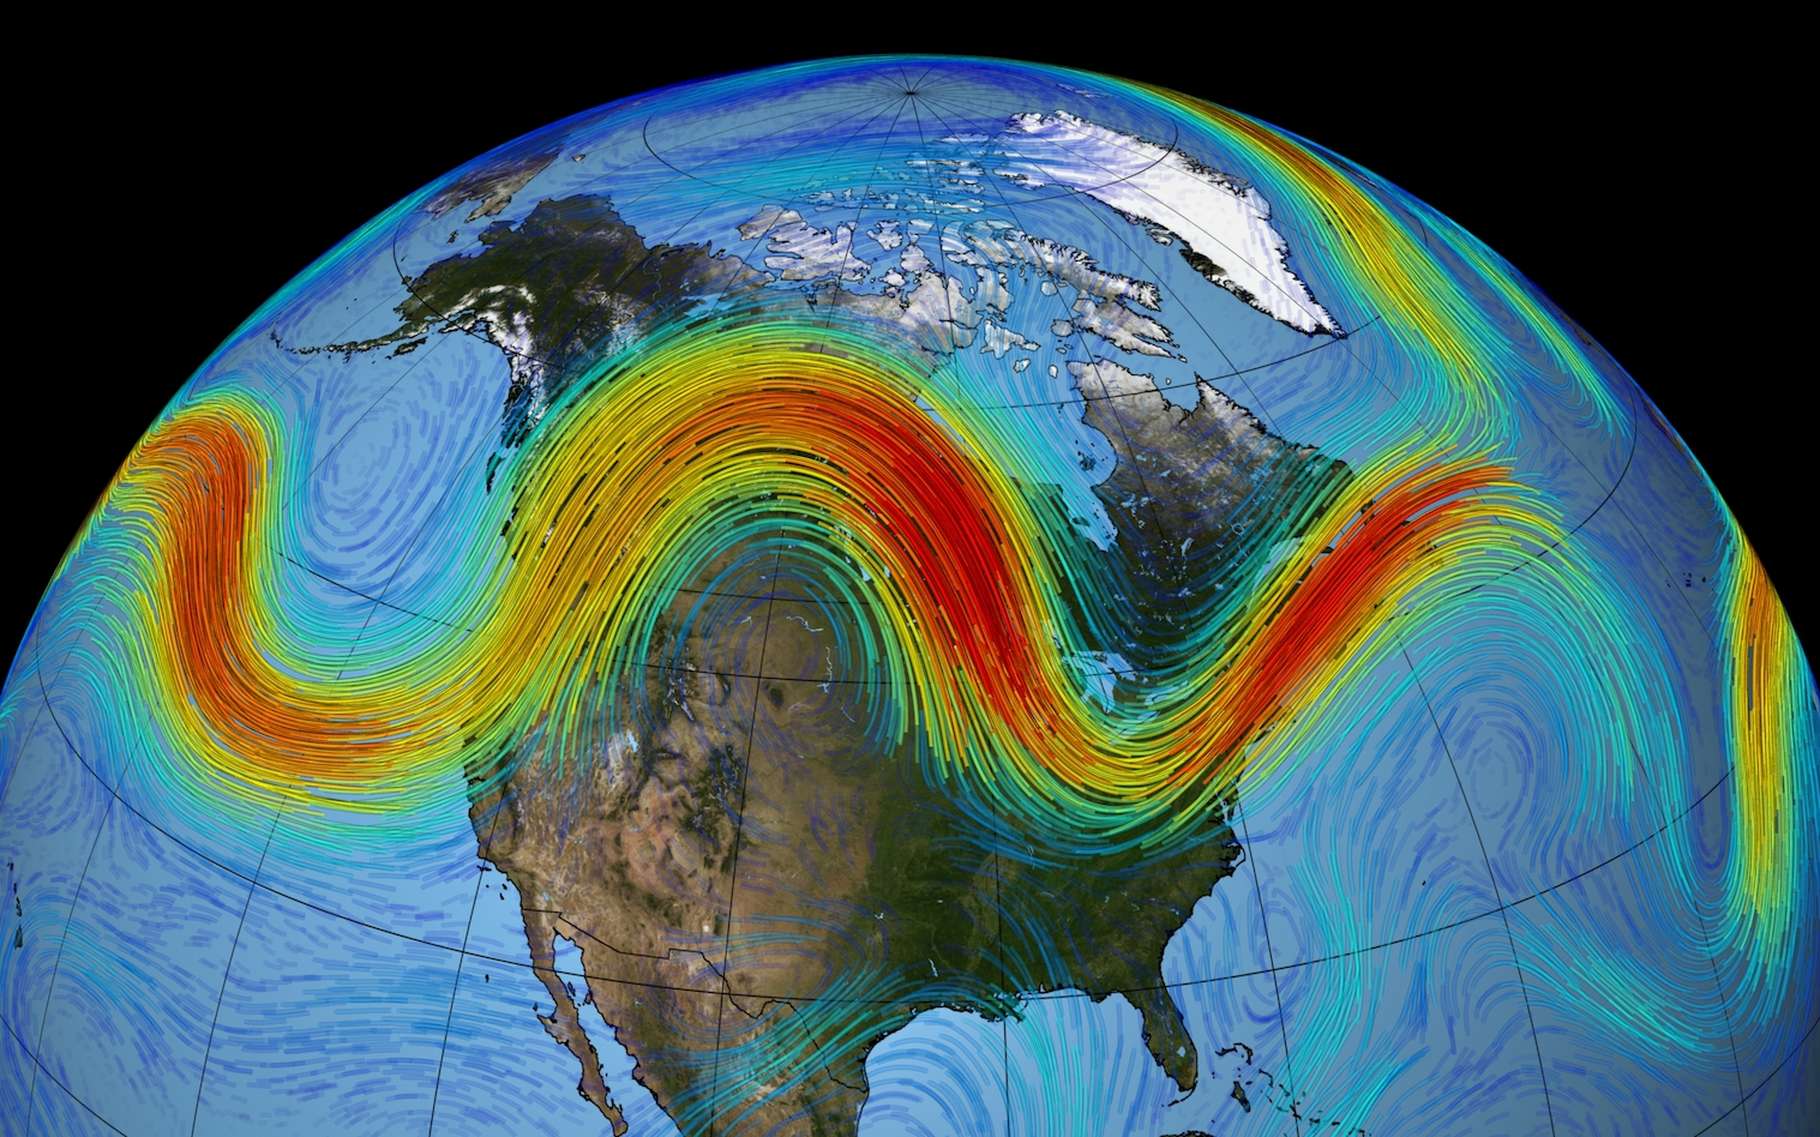 Global warming may shift the Arctic jet stream north, with dire consequences for Europe